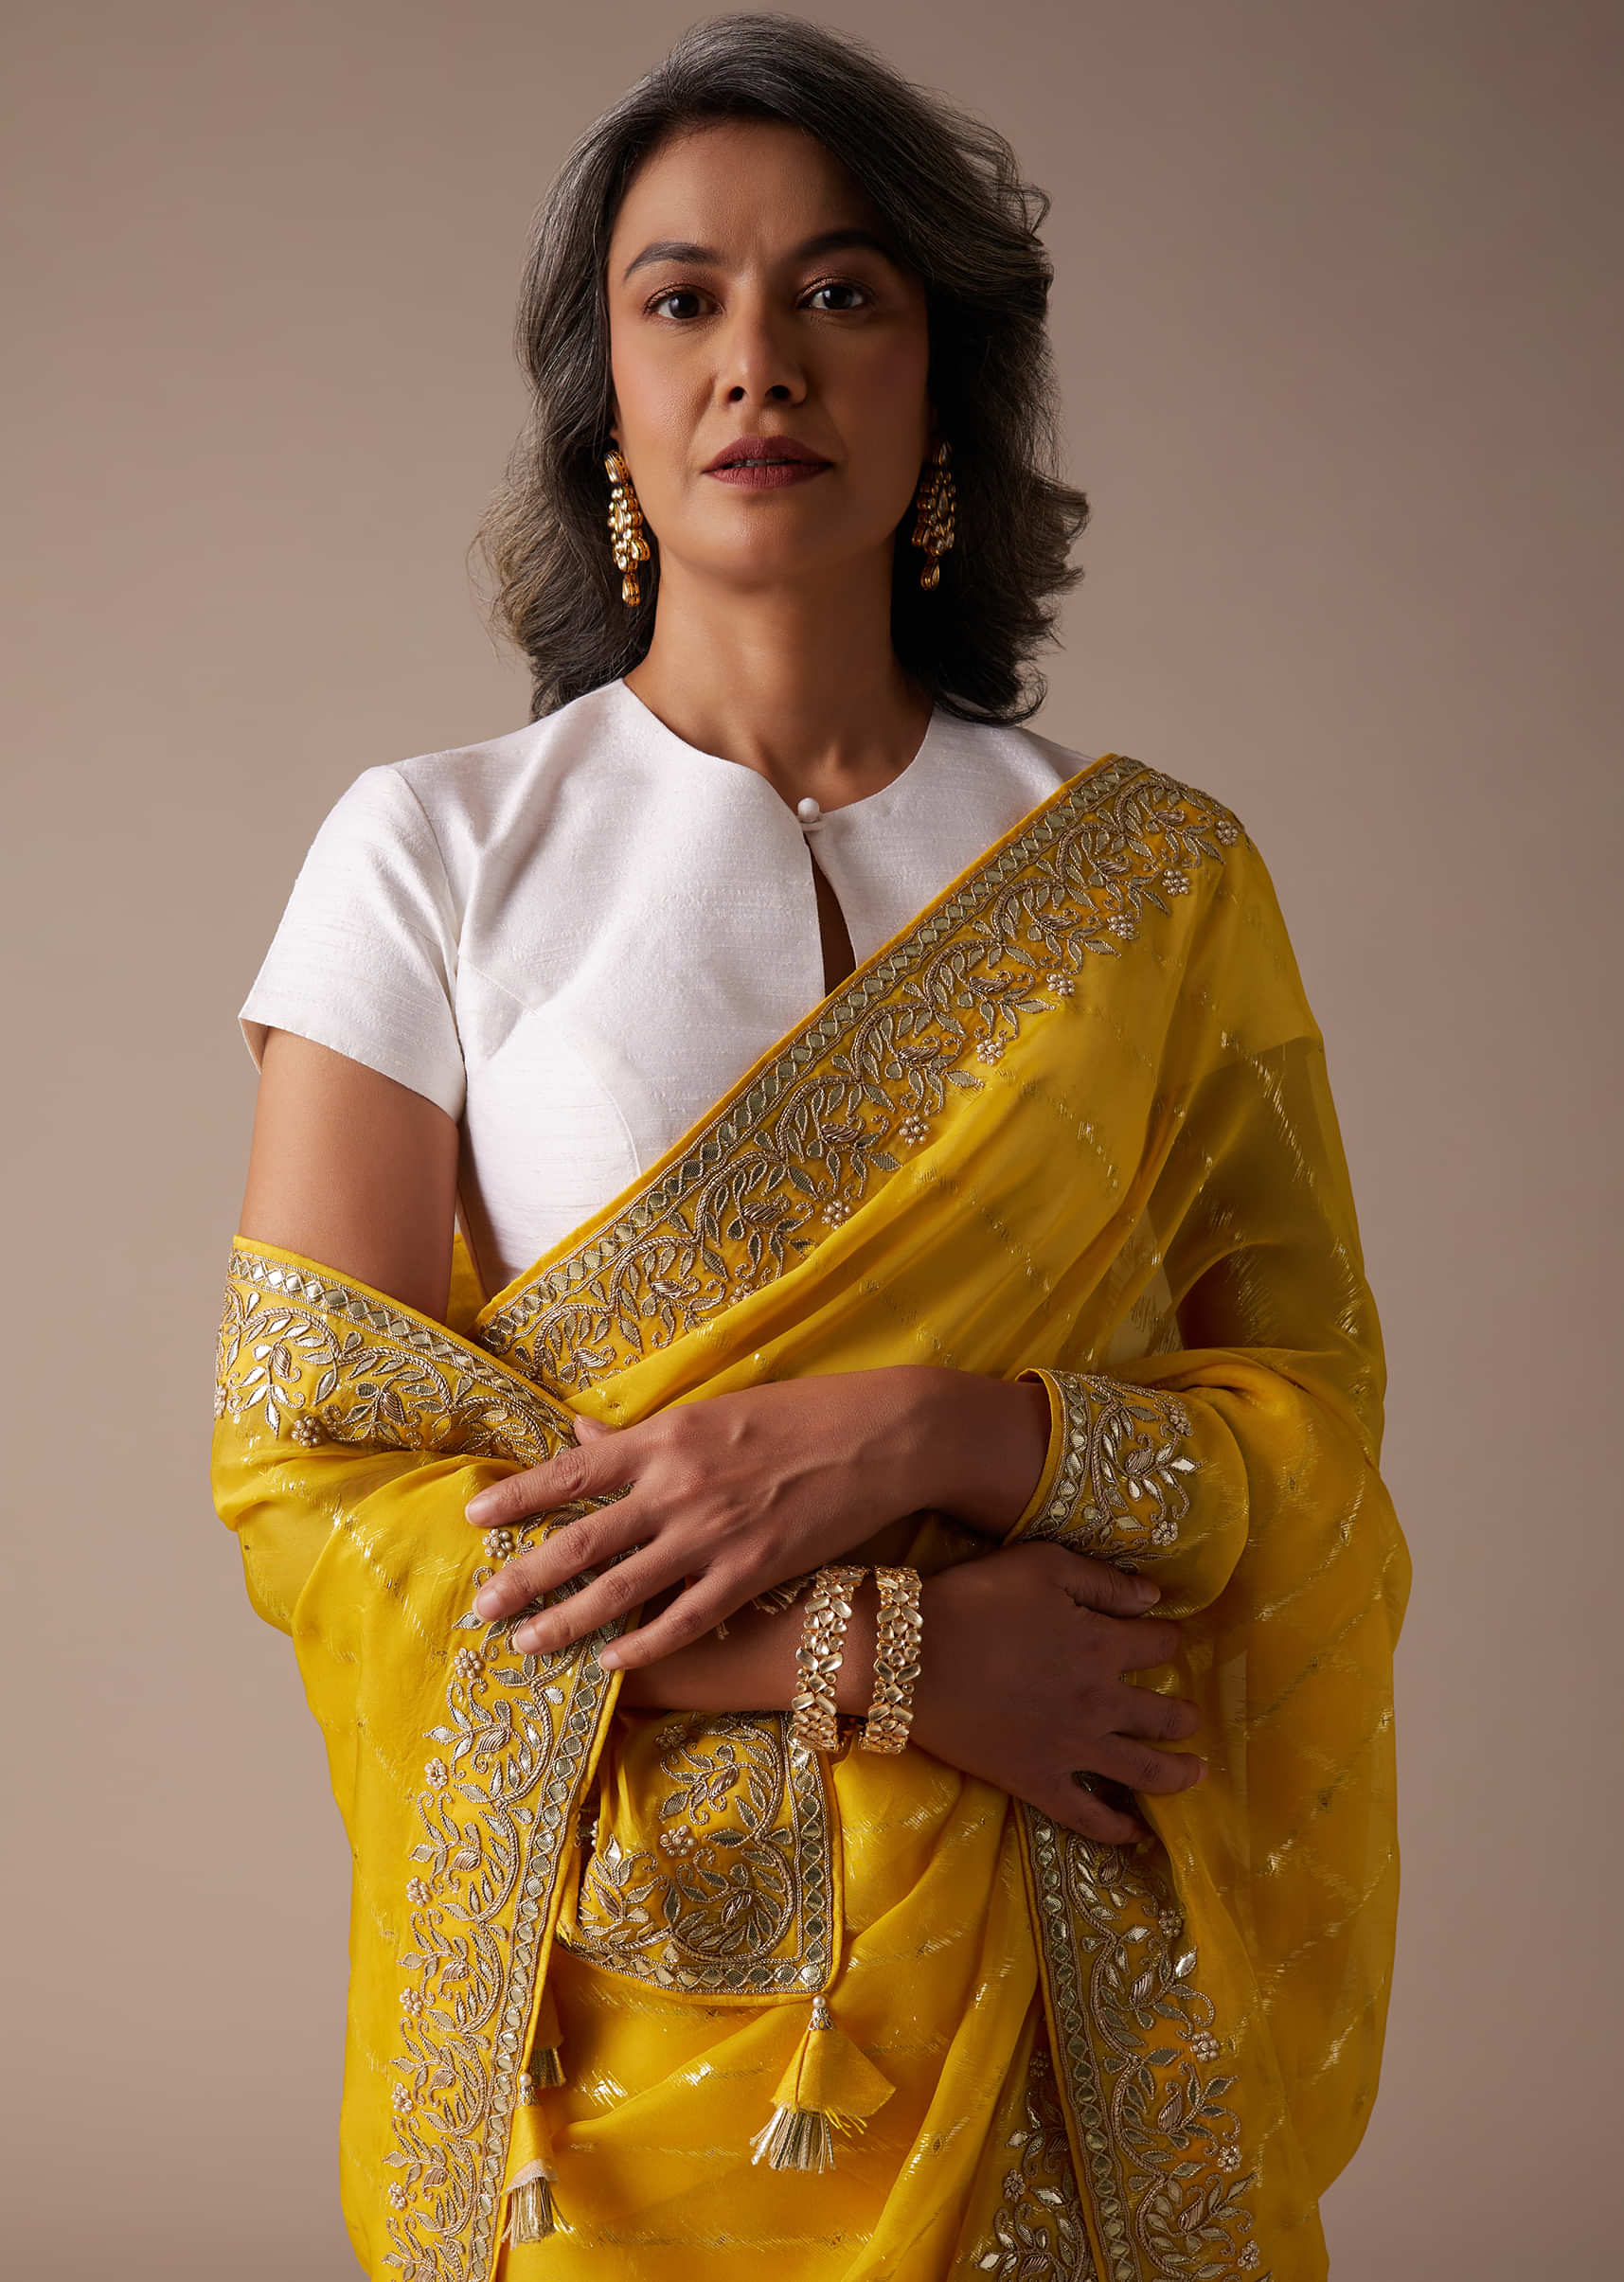 Canary Yellow Saree In Organza With Lurex Woven Diagonal Stripes And Gotta Embroidered Floral Border  